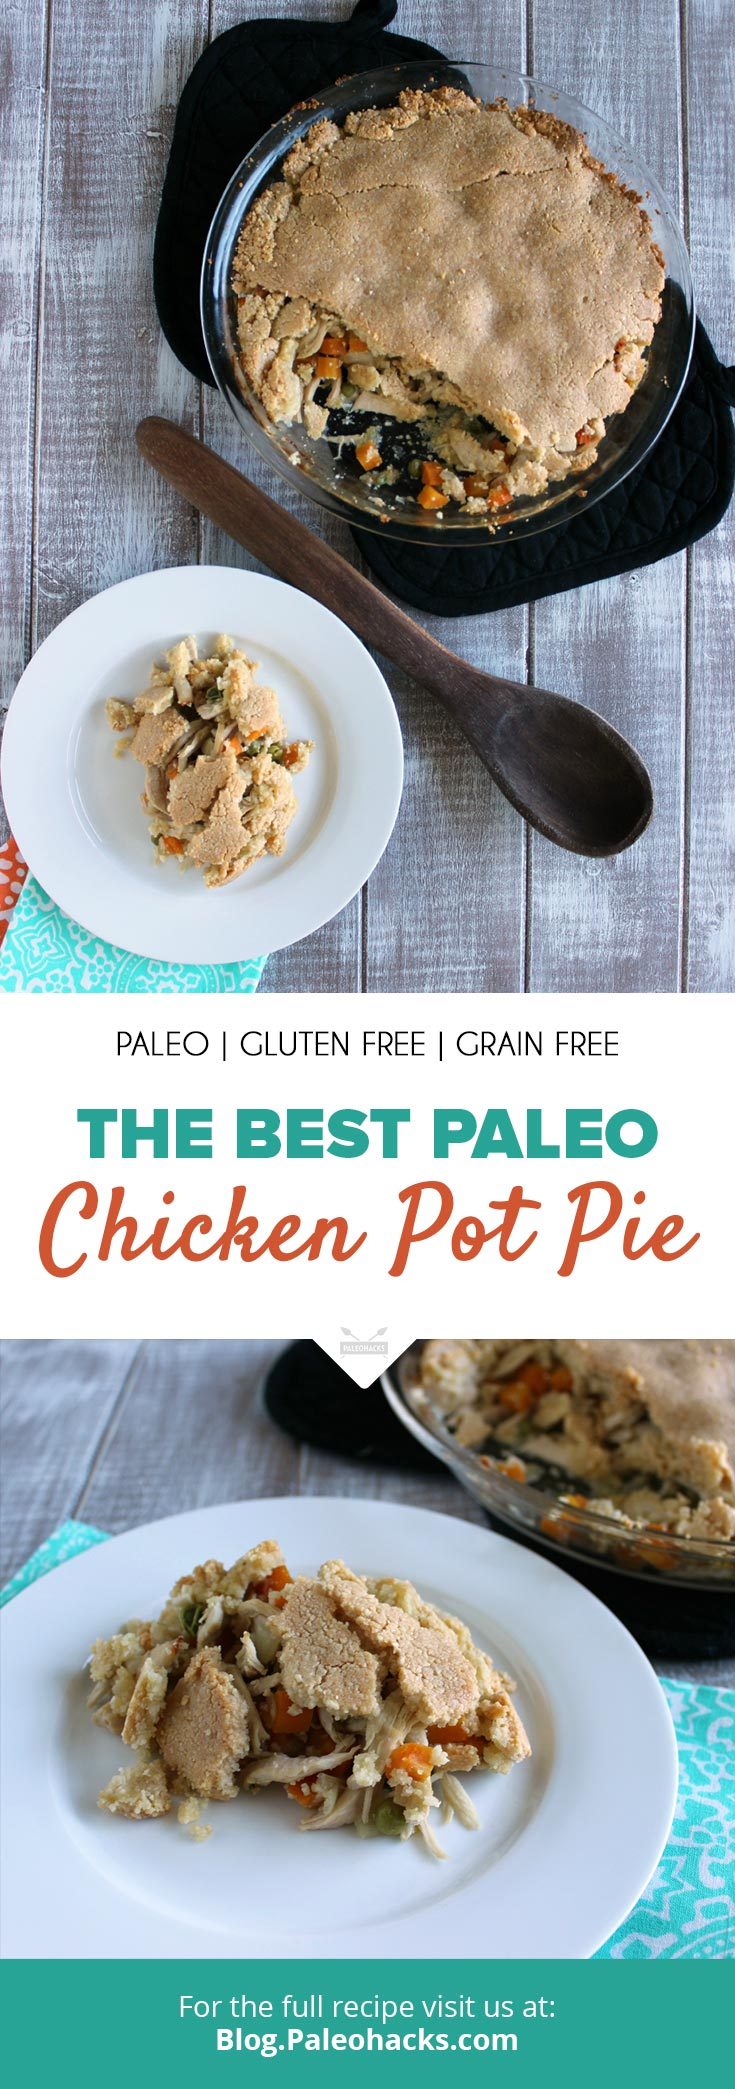 This hearty Paleo Chicken Pot Pie is full of flavor and comes topped with a crispy, golden brown crust that'll surely warm you up.